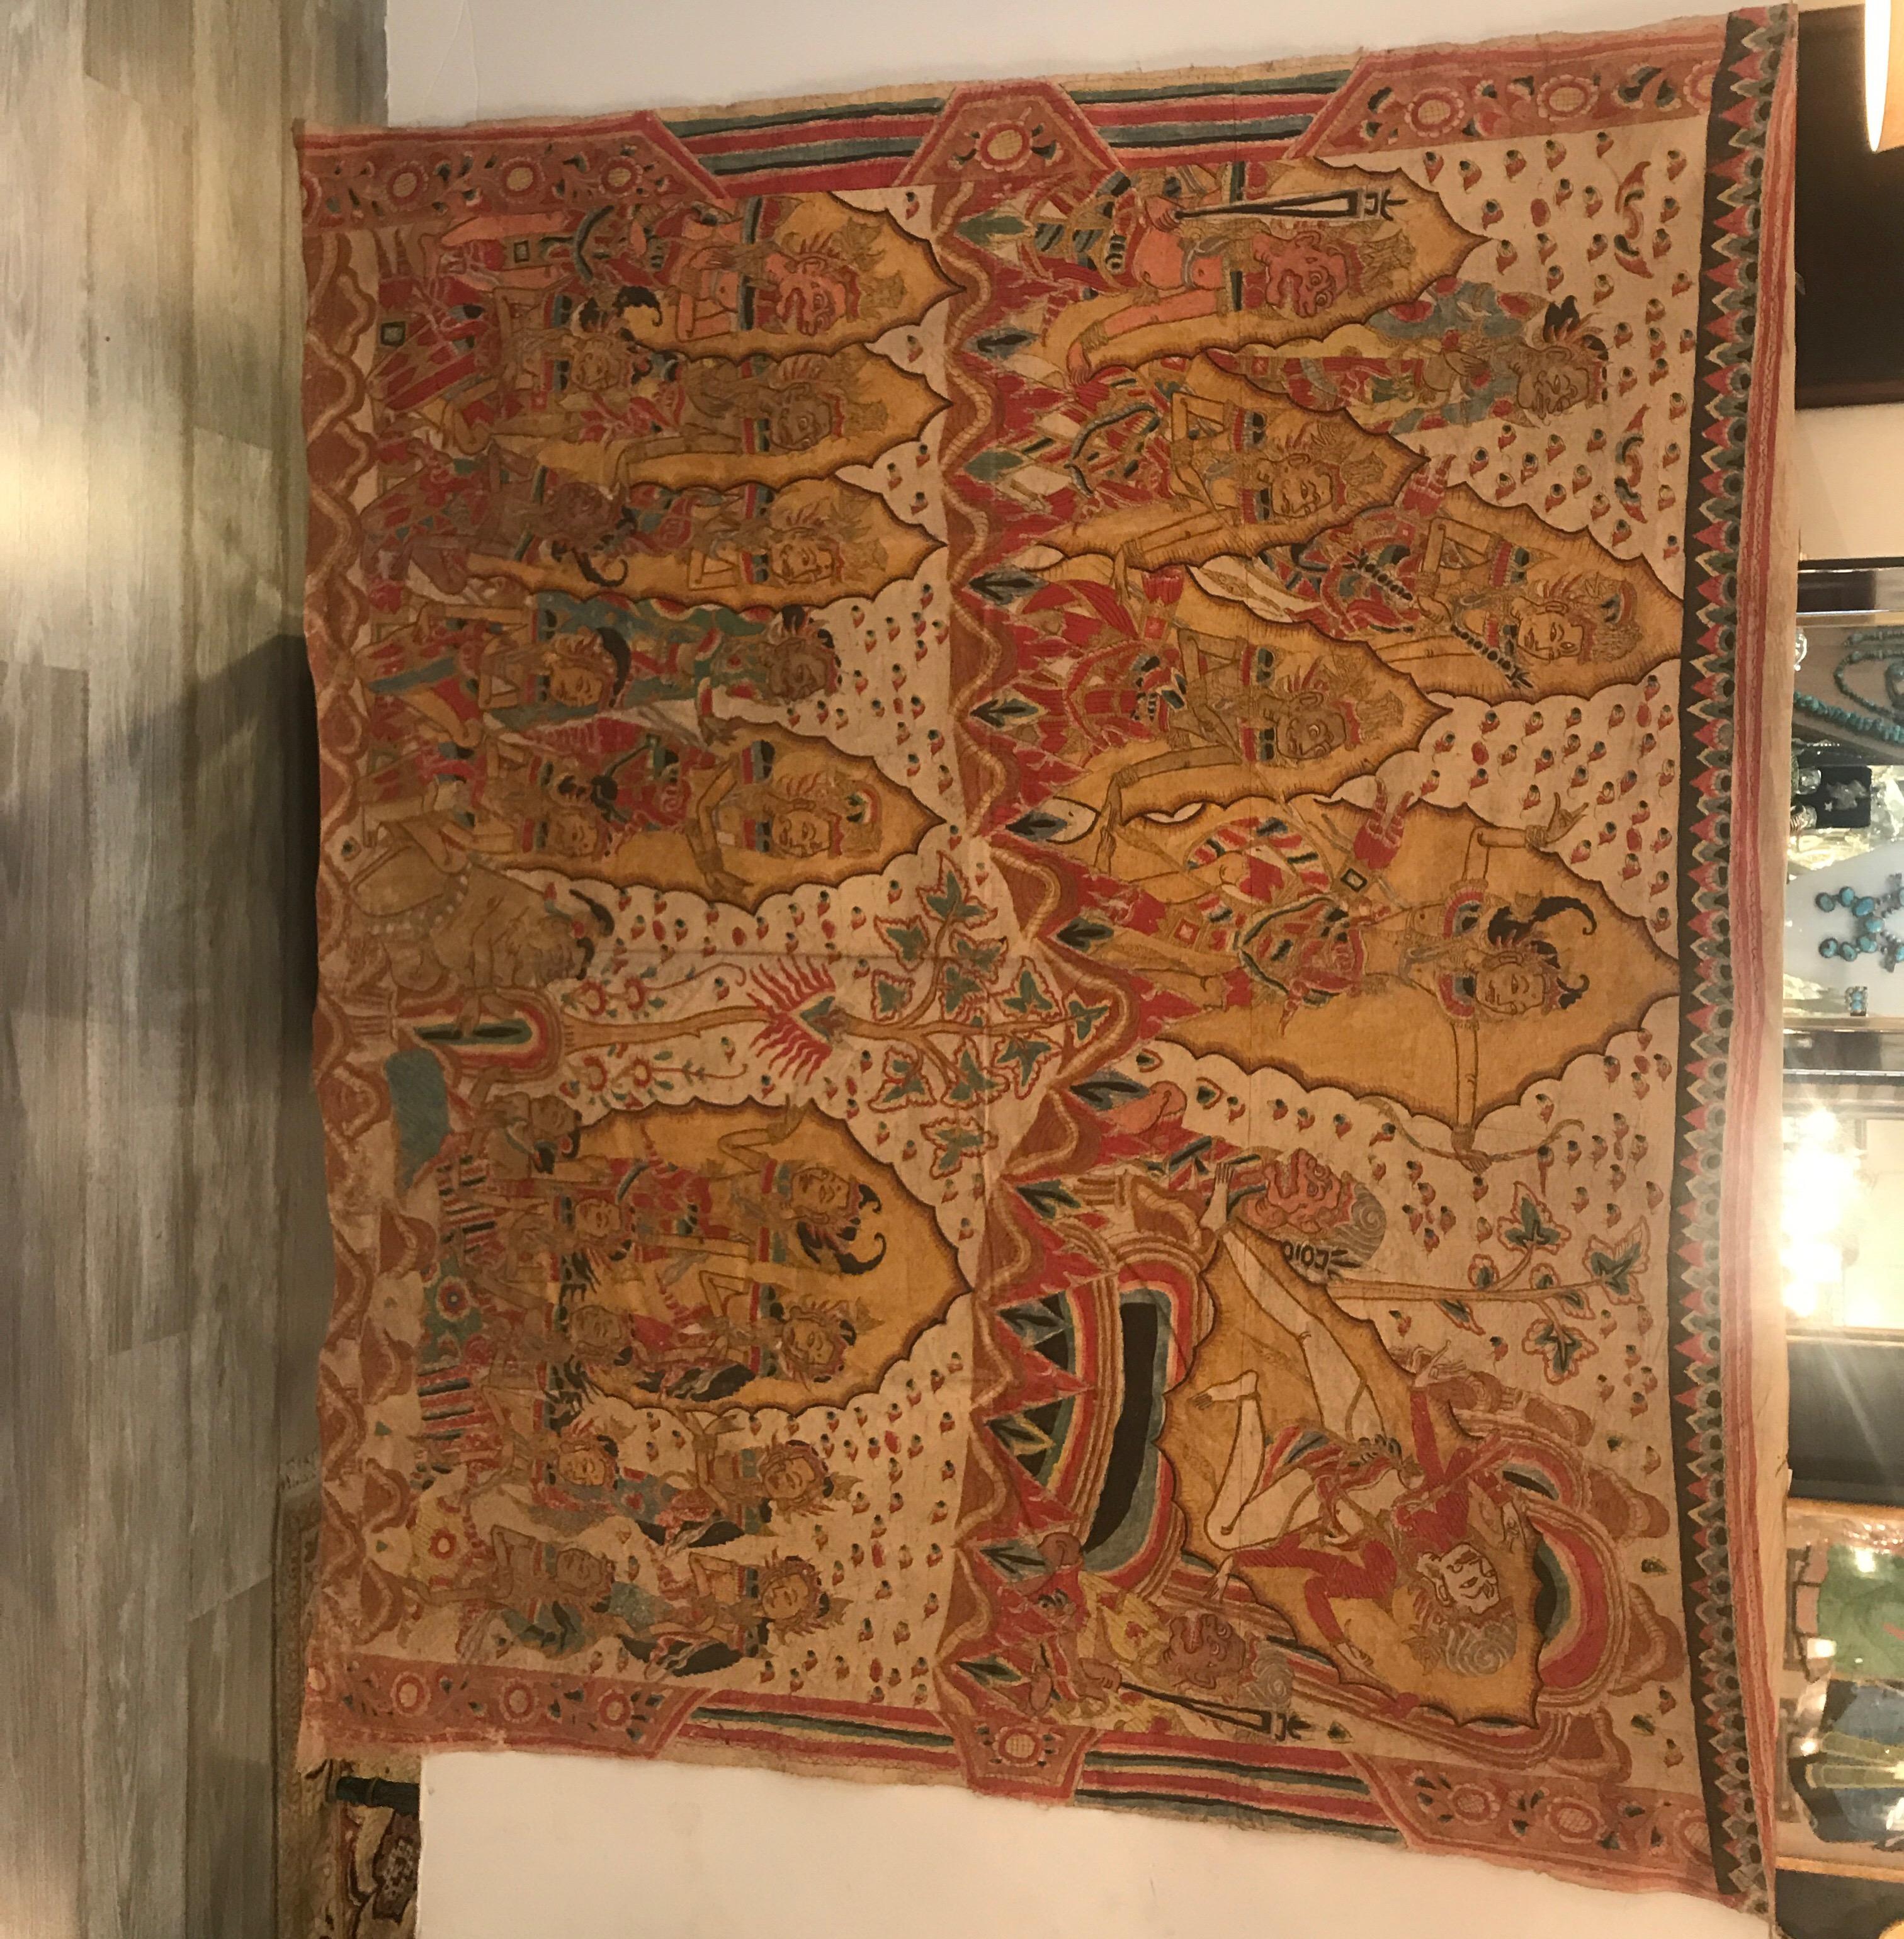 Vibrant hand painted Balinese batik handwoven tapestry, circa 1900. The hand loomed cotton fabric with hand painted figurative scenes in red, gold, blue and white. The looms at that time were of a certain with that the material is a double width